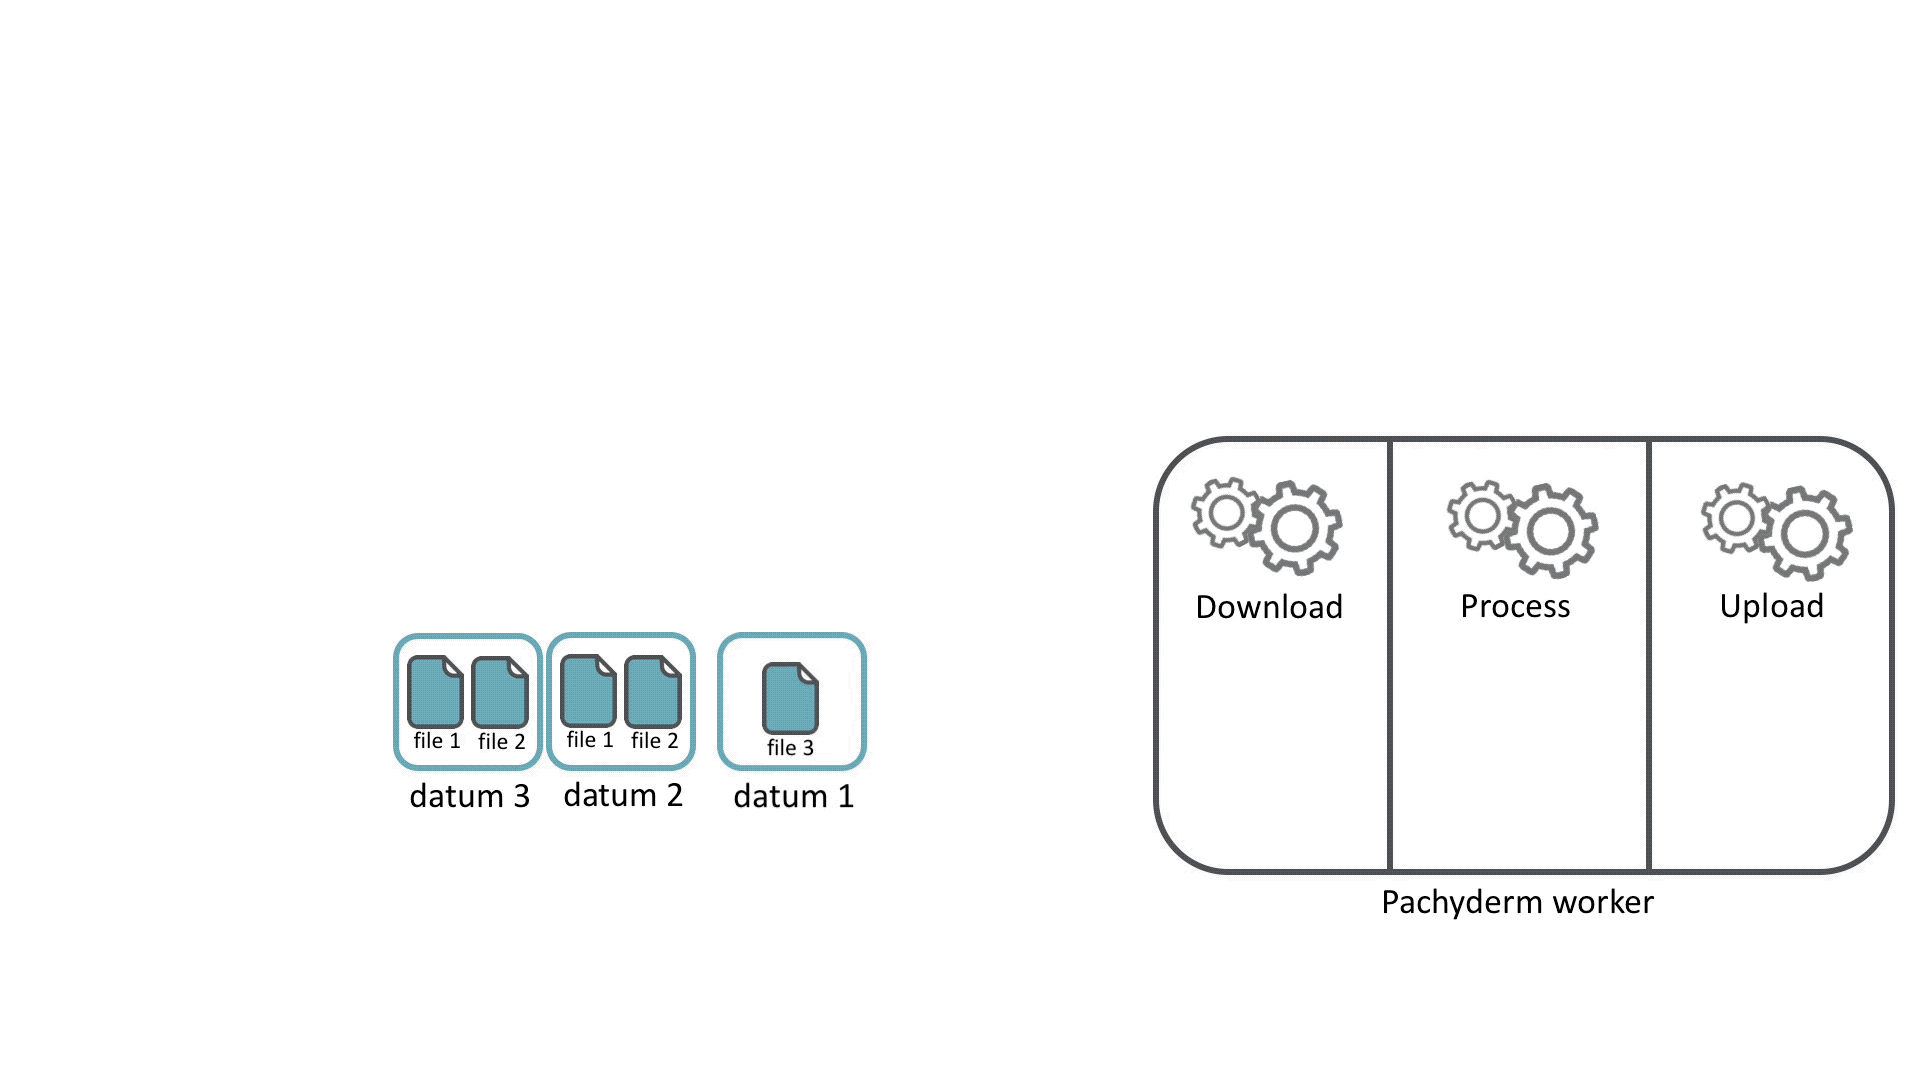 Distributed processing internals